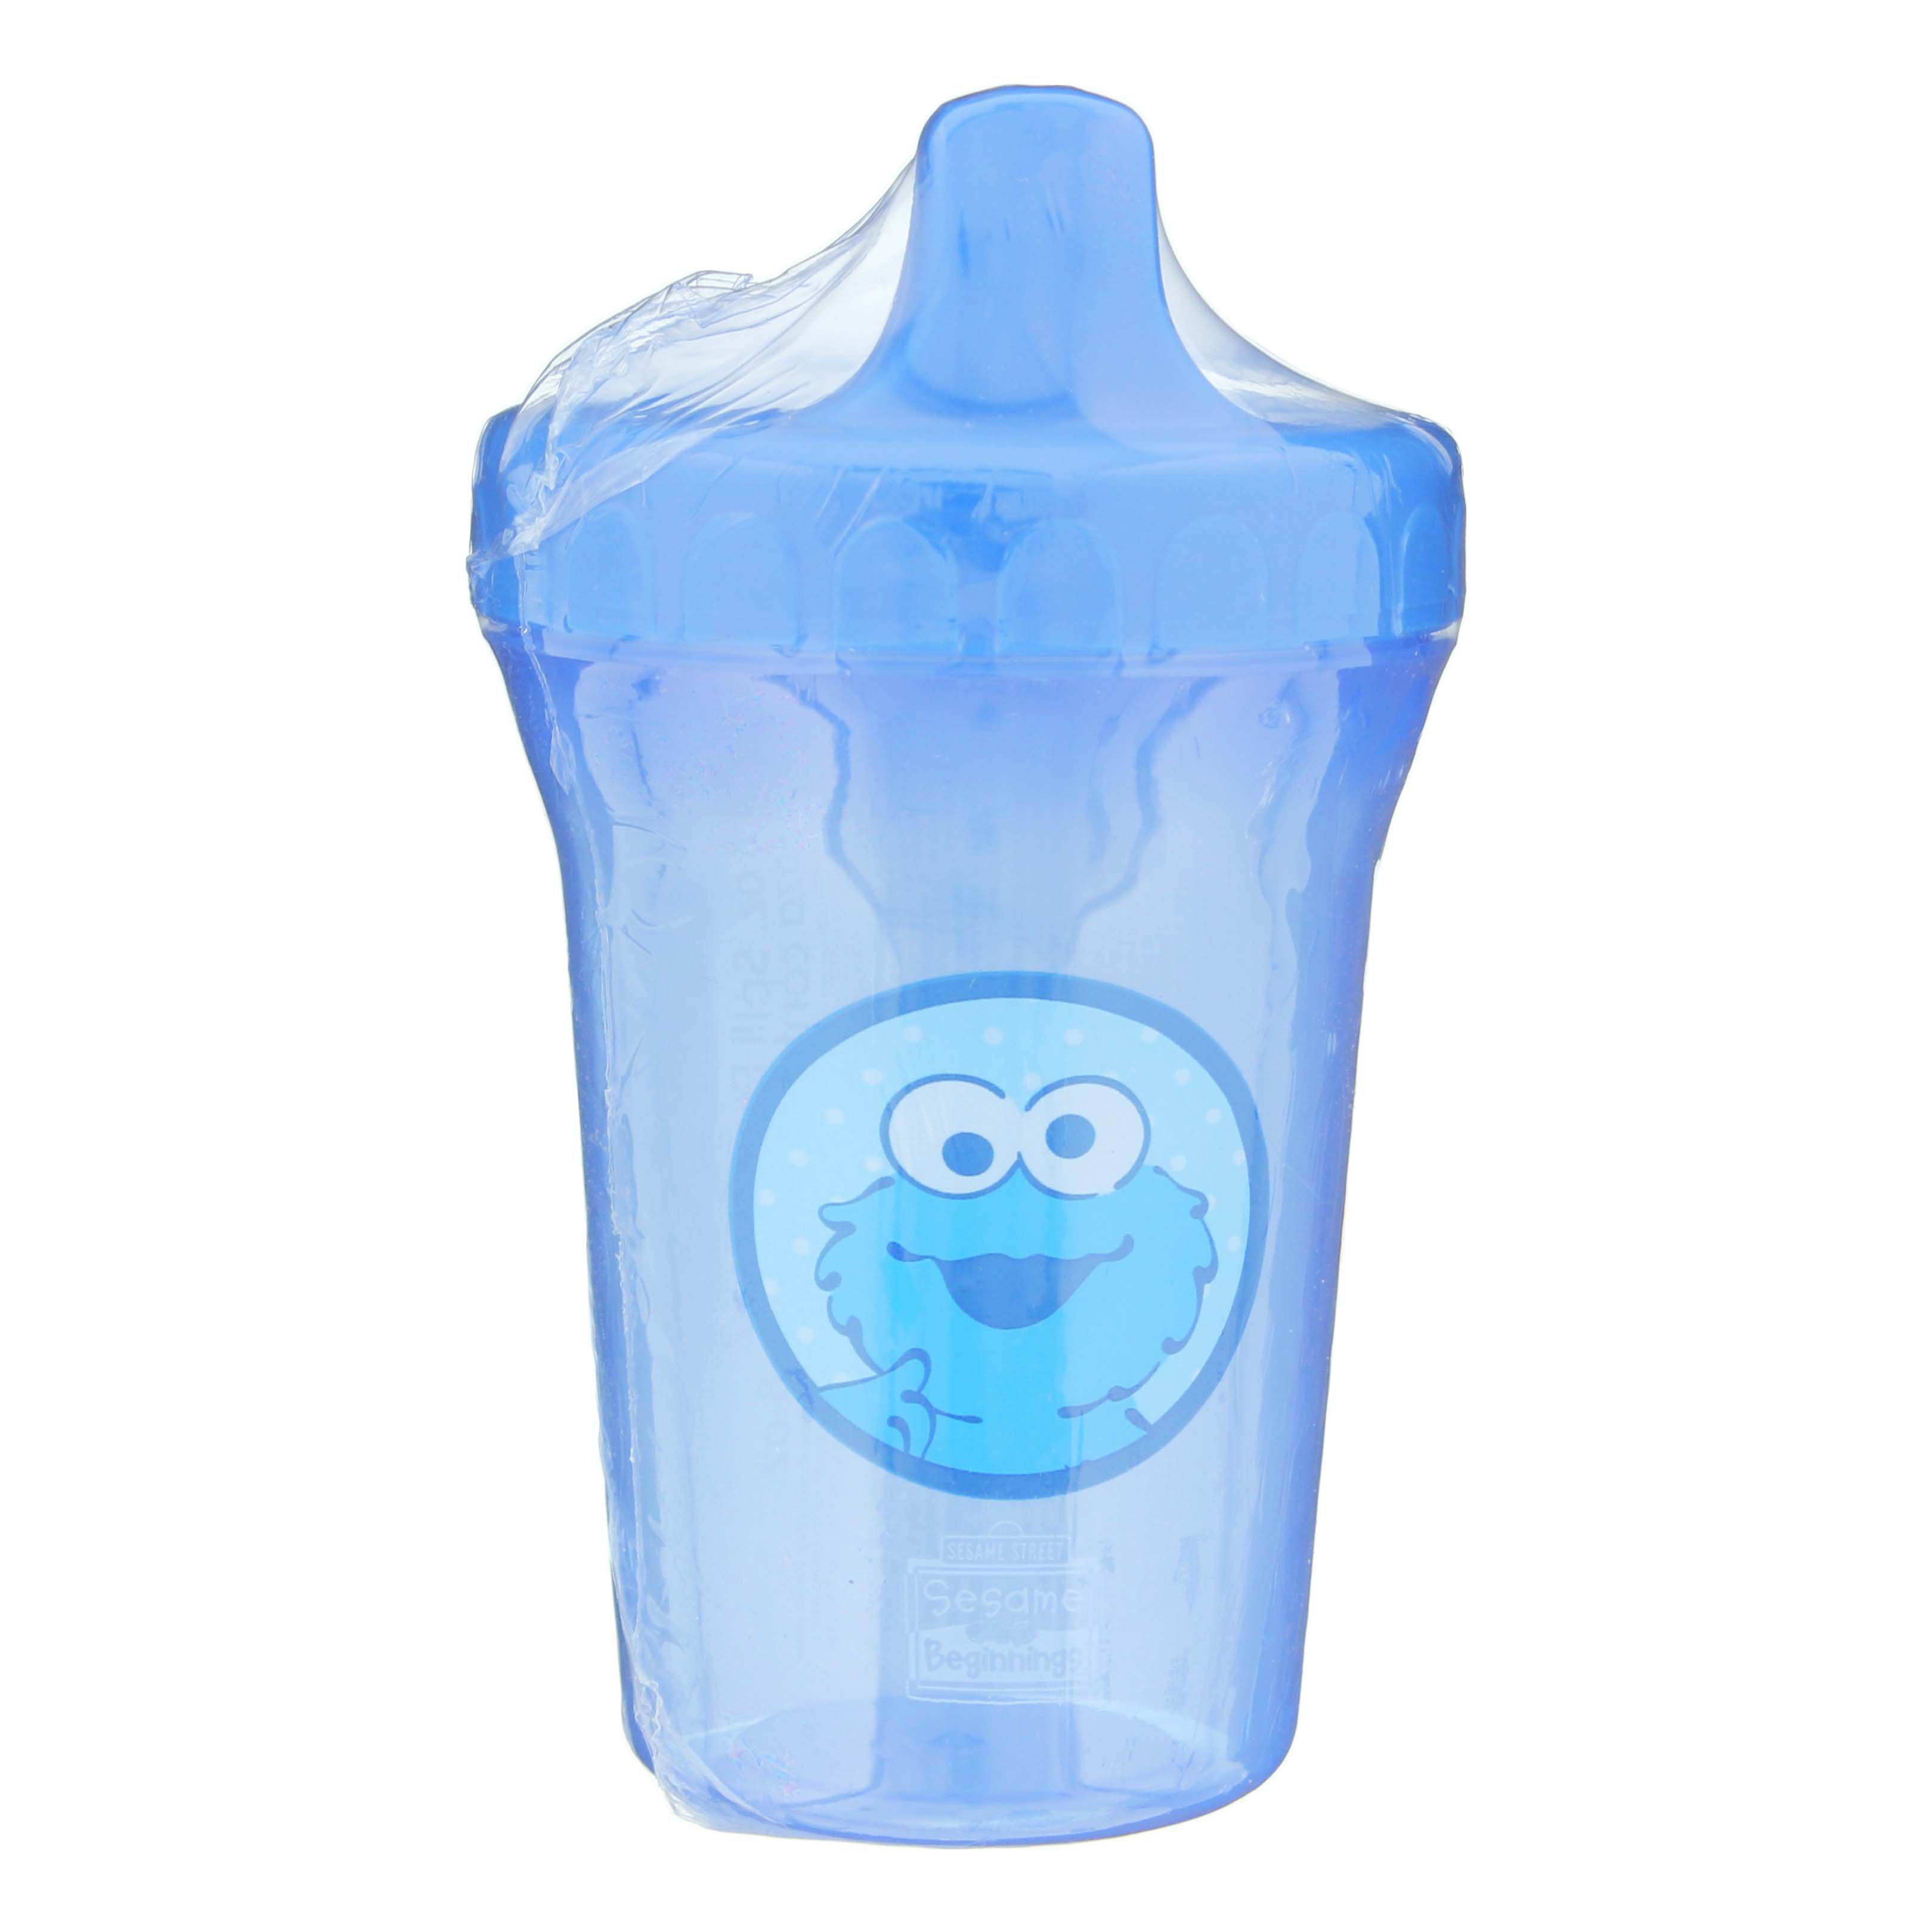  Sesame Street Sesame Beginnings 8oz. Spill Proof Cups - Big  Bird, Cookie Monster and Elmo (3-Pack), Multicolored : Baby